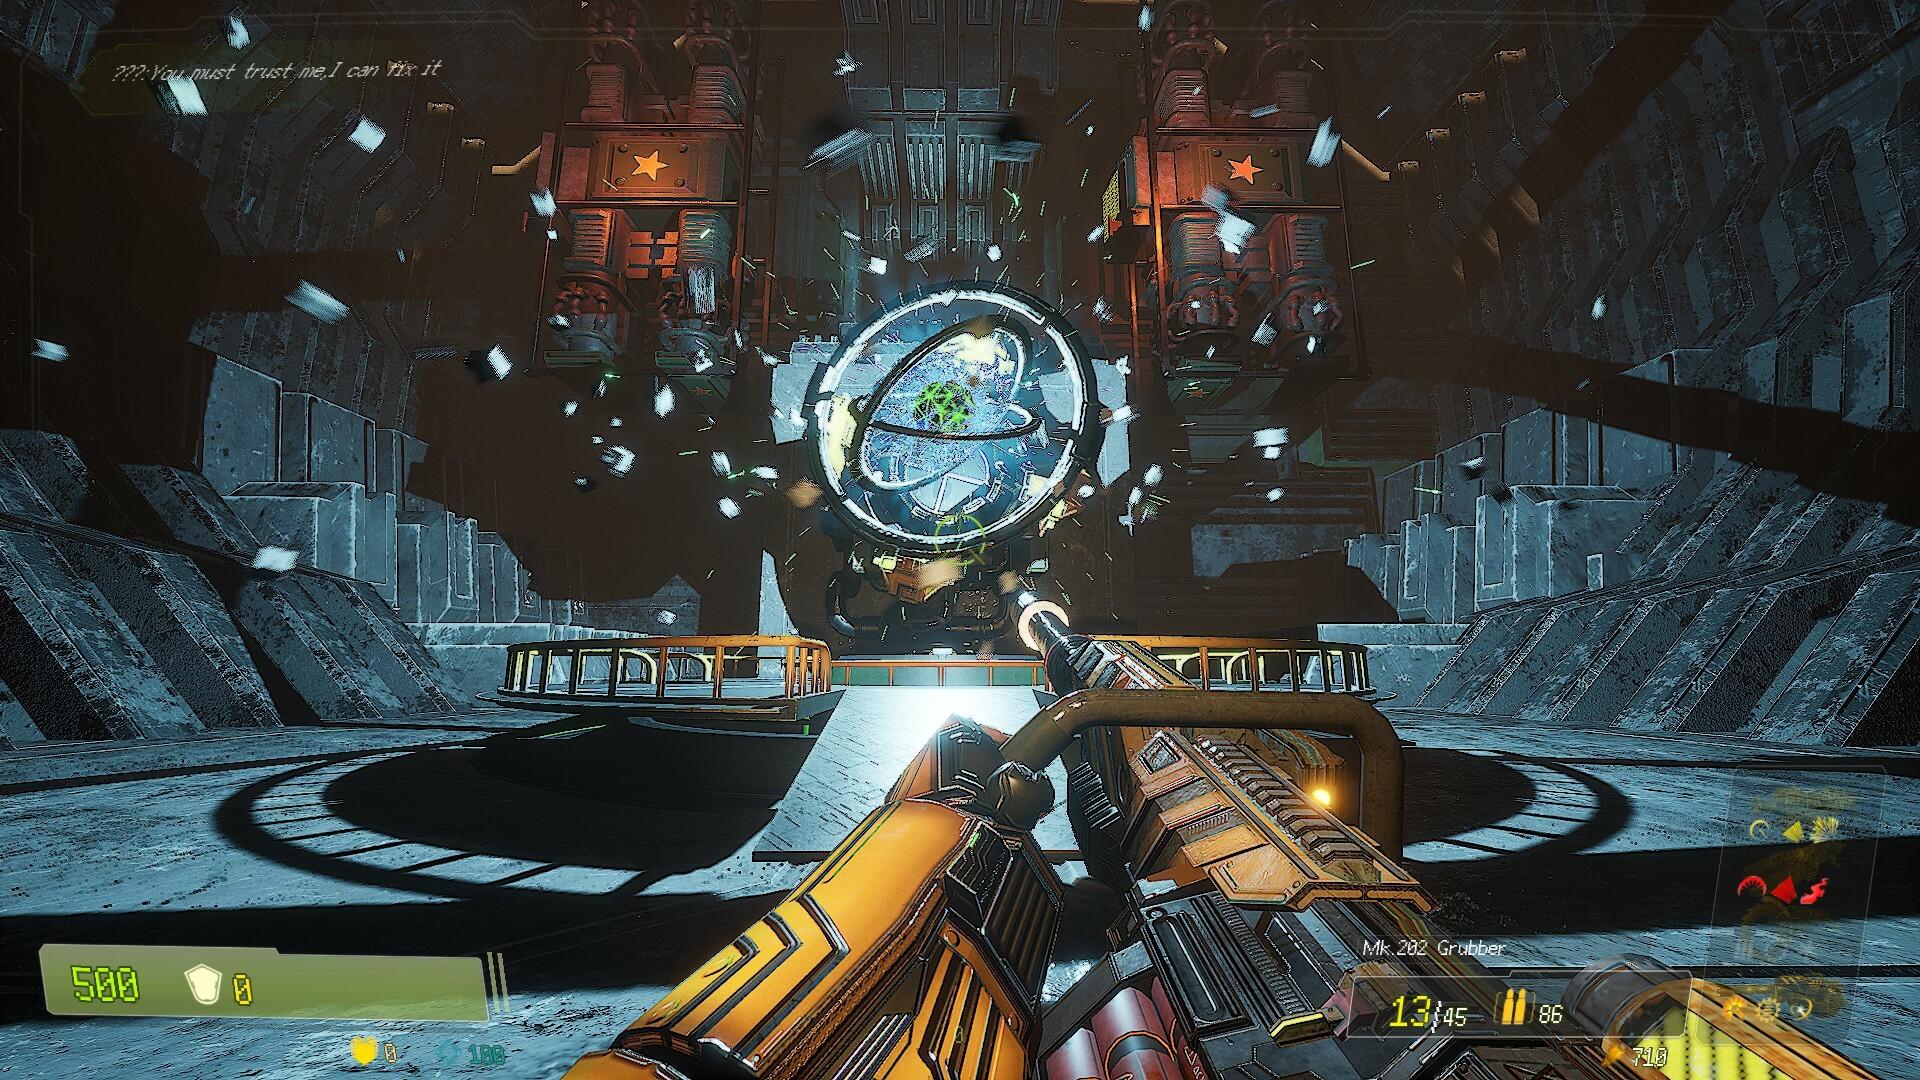 Screenshot 1 of OuterRealm 